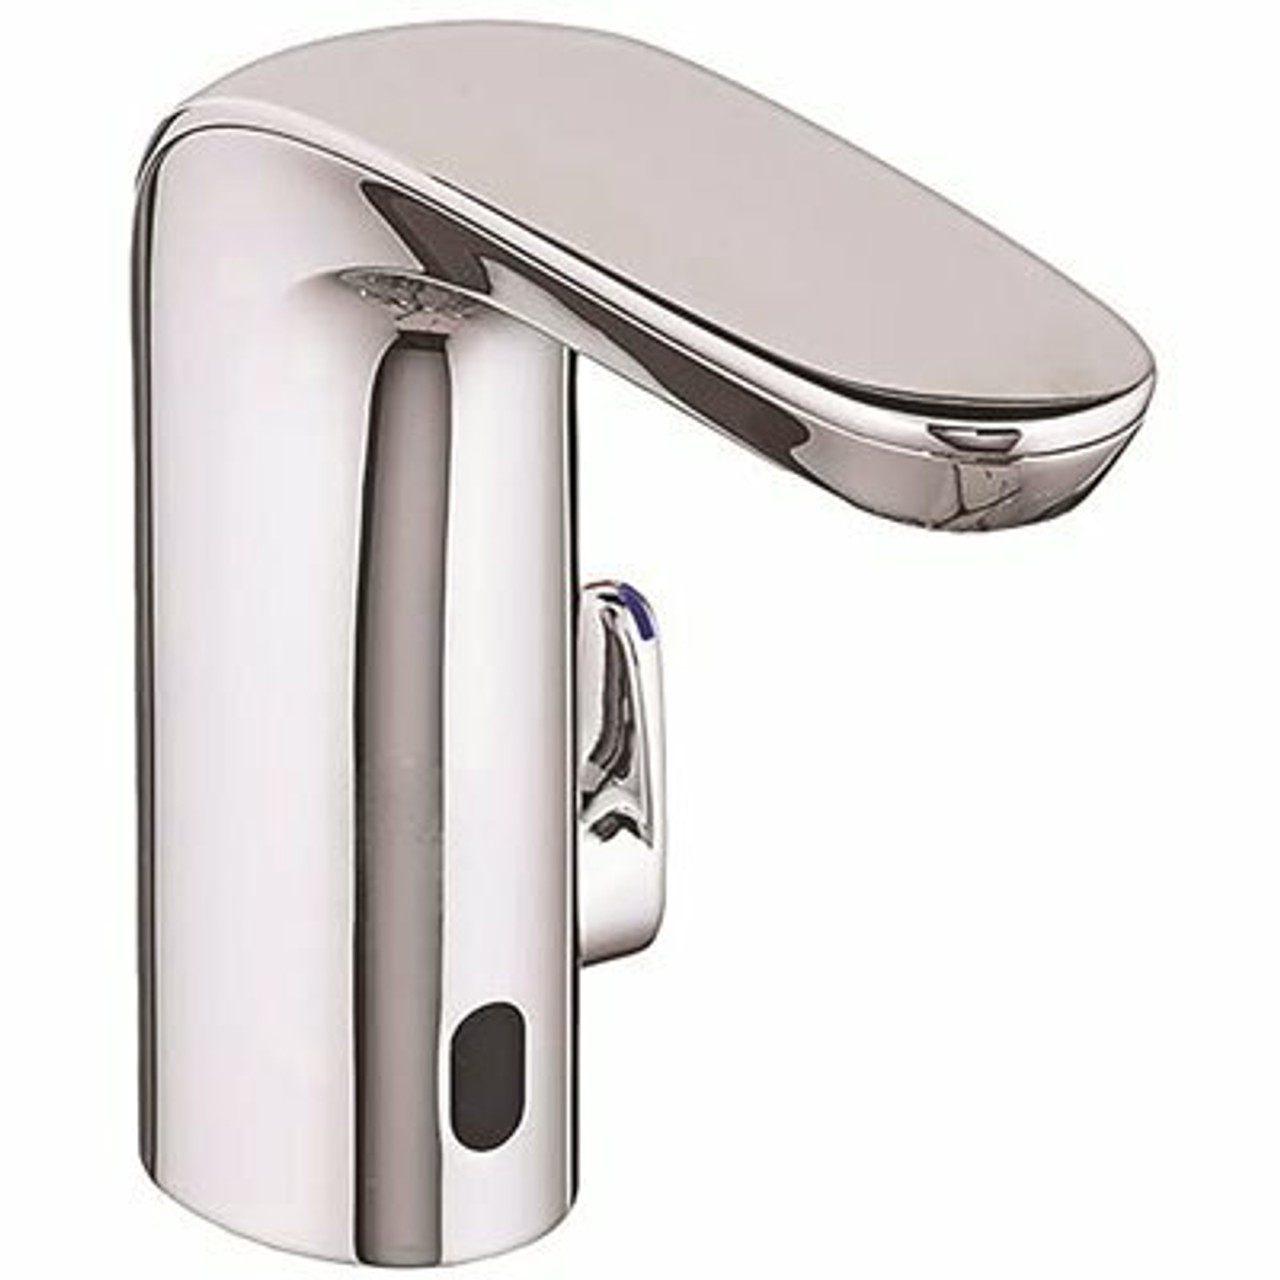 Nextgen Selectronic Battery Power Single Hole Touchless Bathroom Faucet, Smarttherm Safety Shut-Off In Chrome (4-Pack) - 316470474